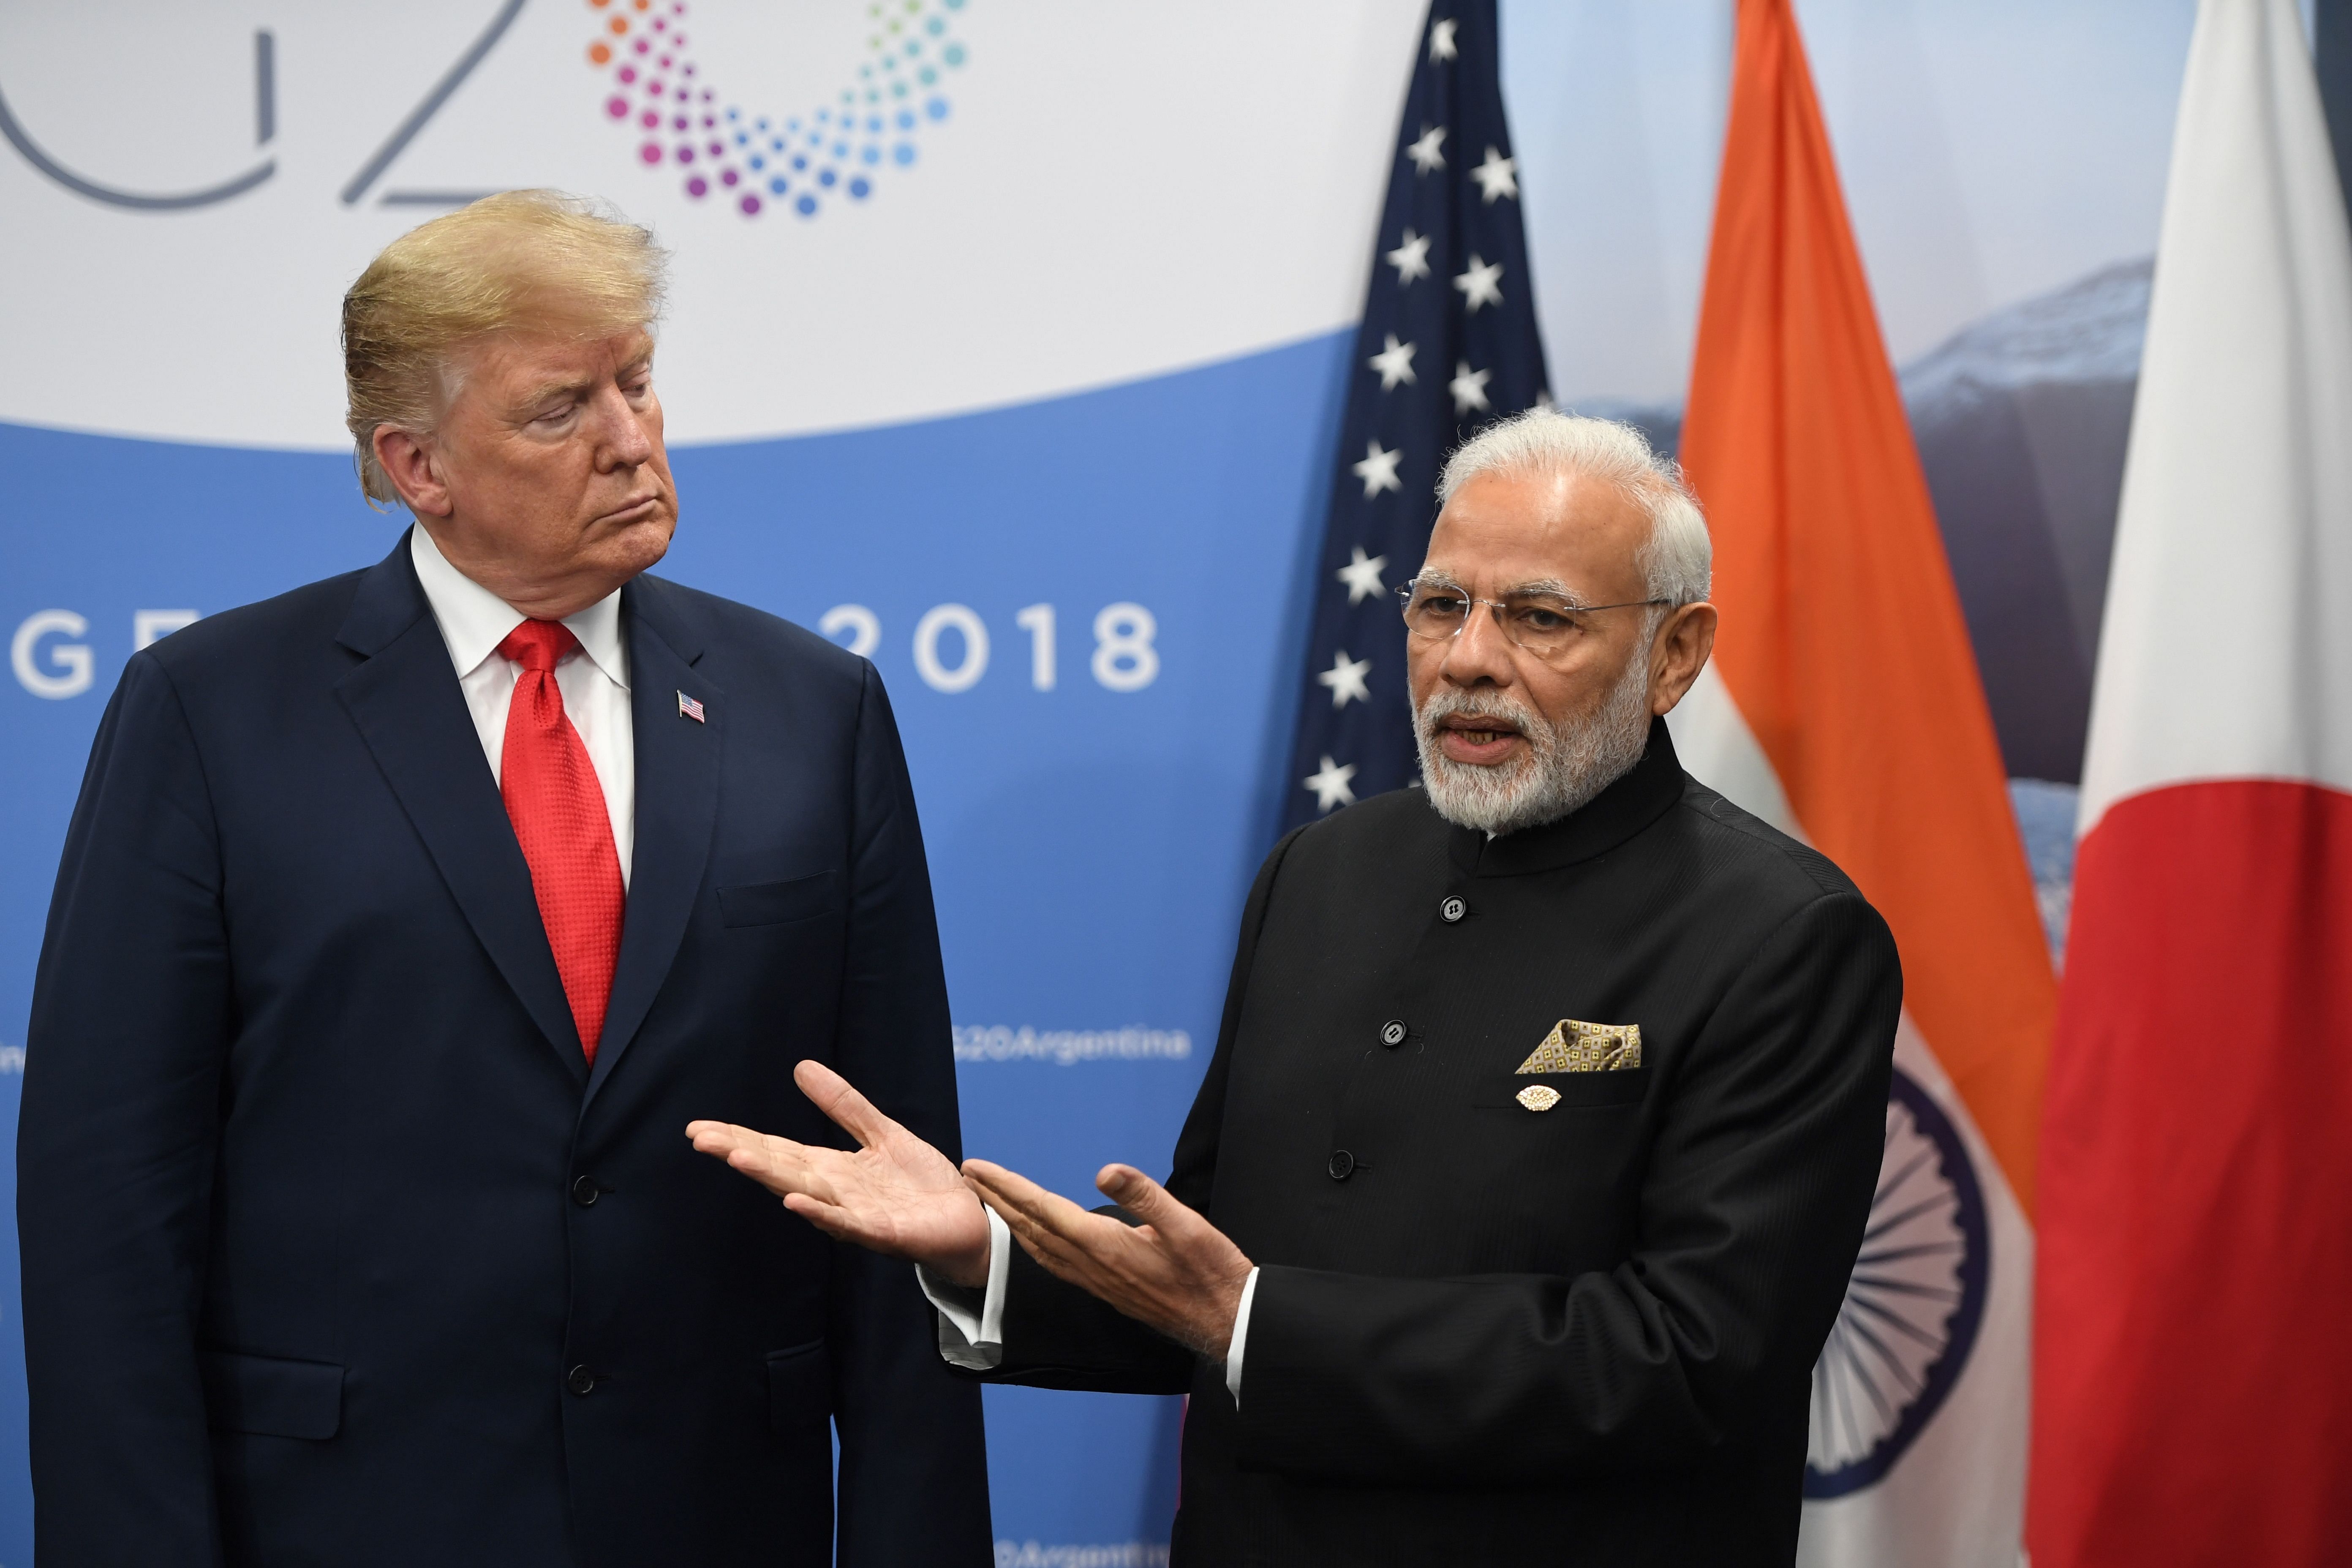 The draft law is not part of the trade discussions, Indian officials say, because the issue is too difficult to resolve at the same time. (Credit: AFP Photo)